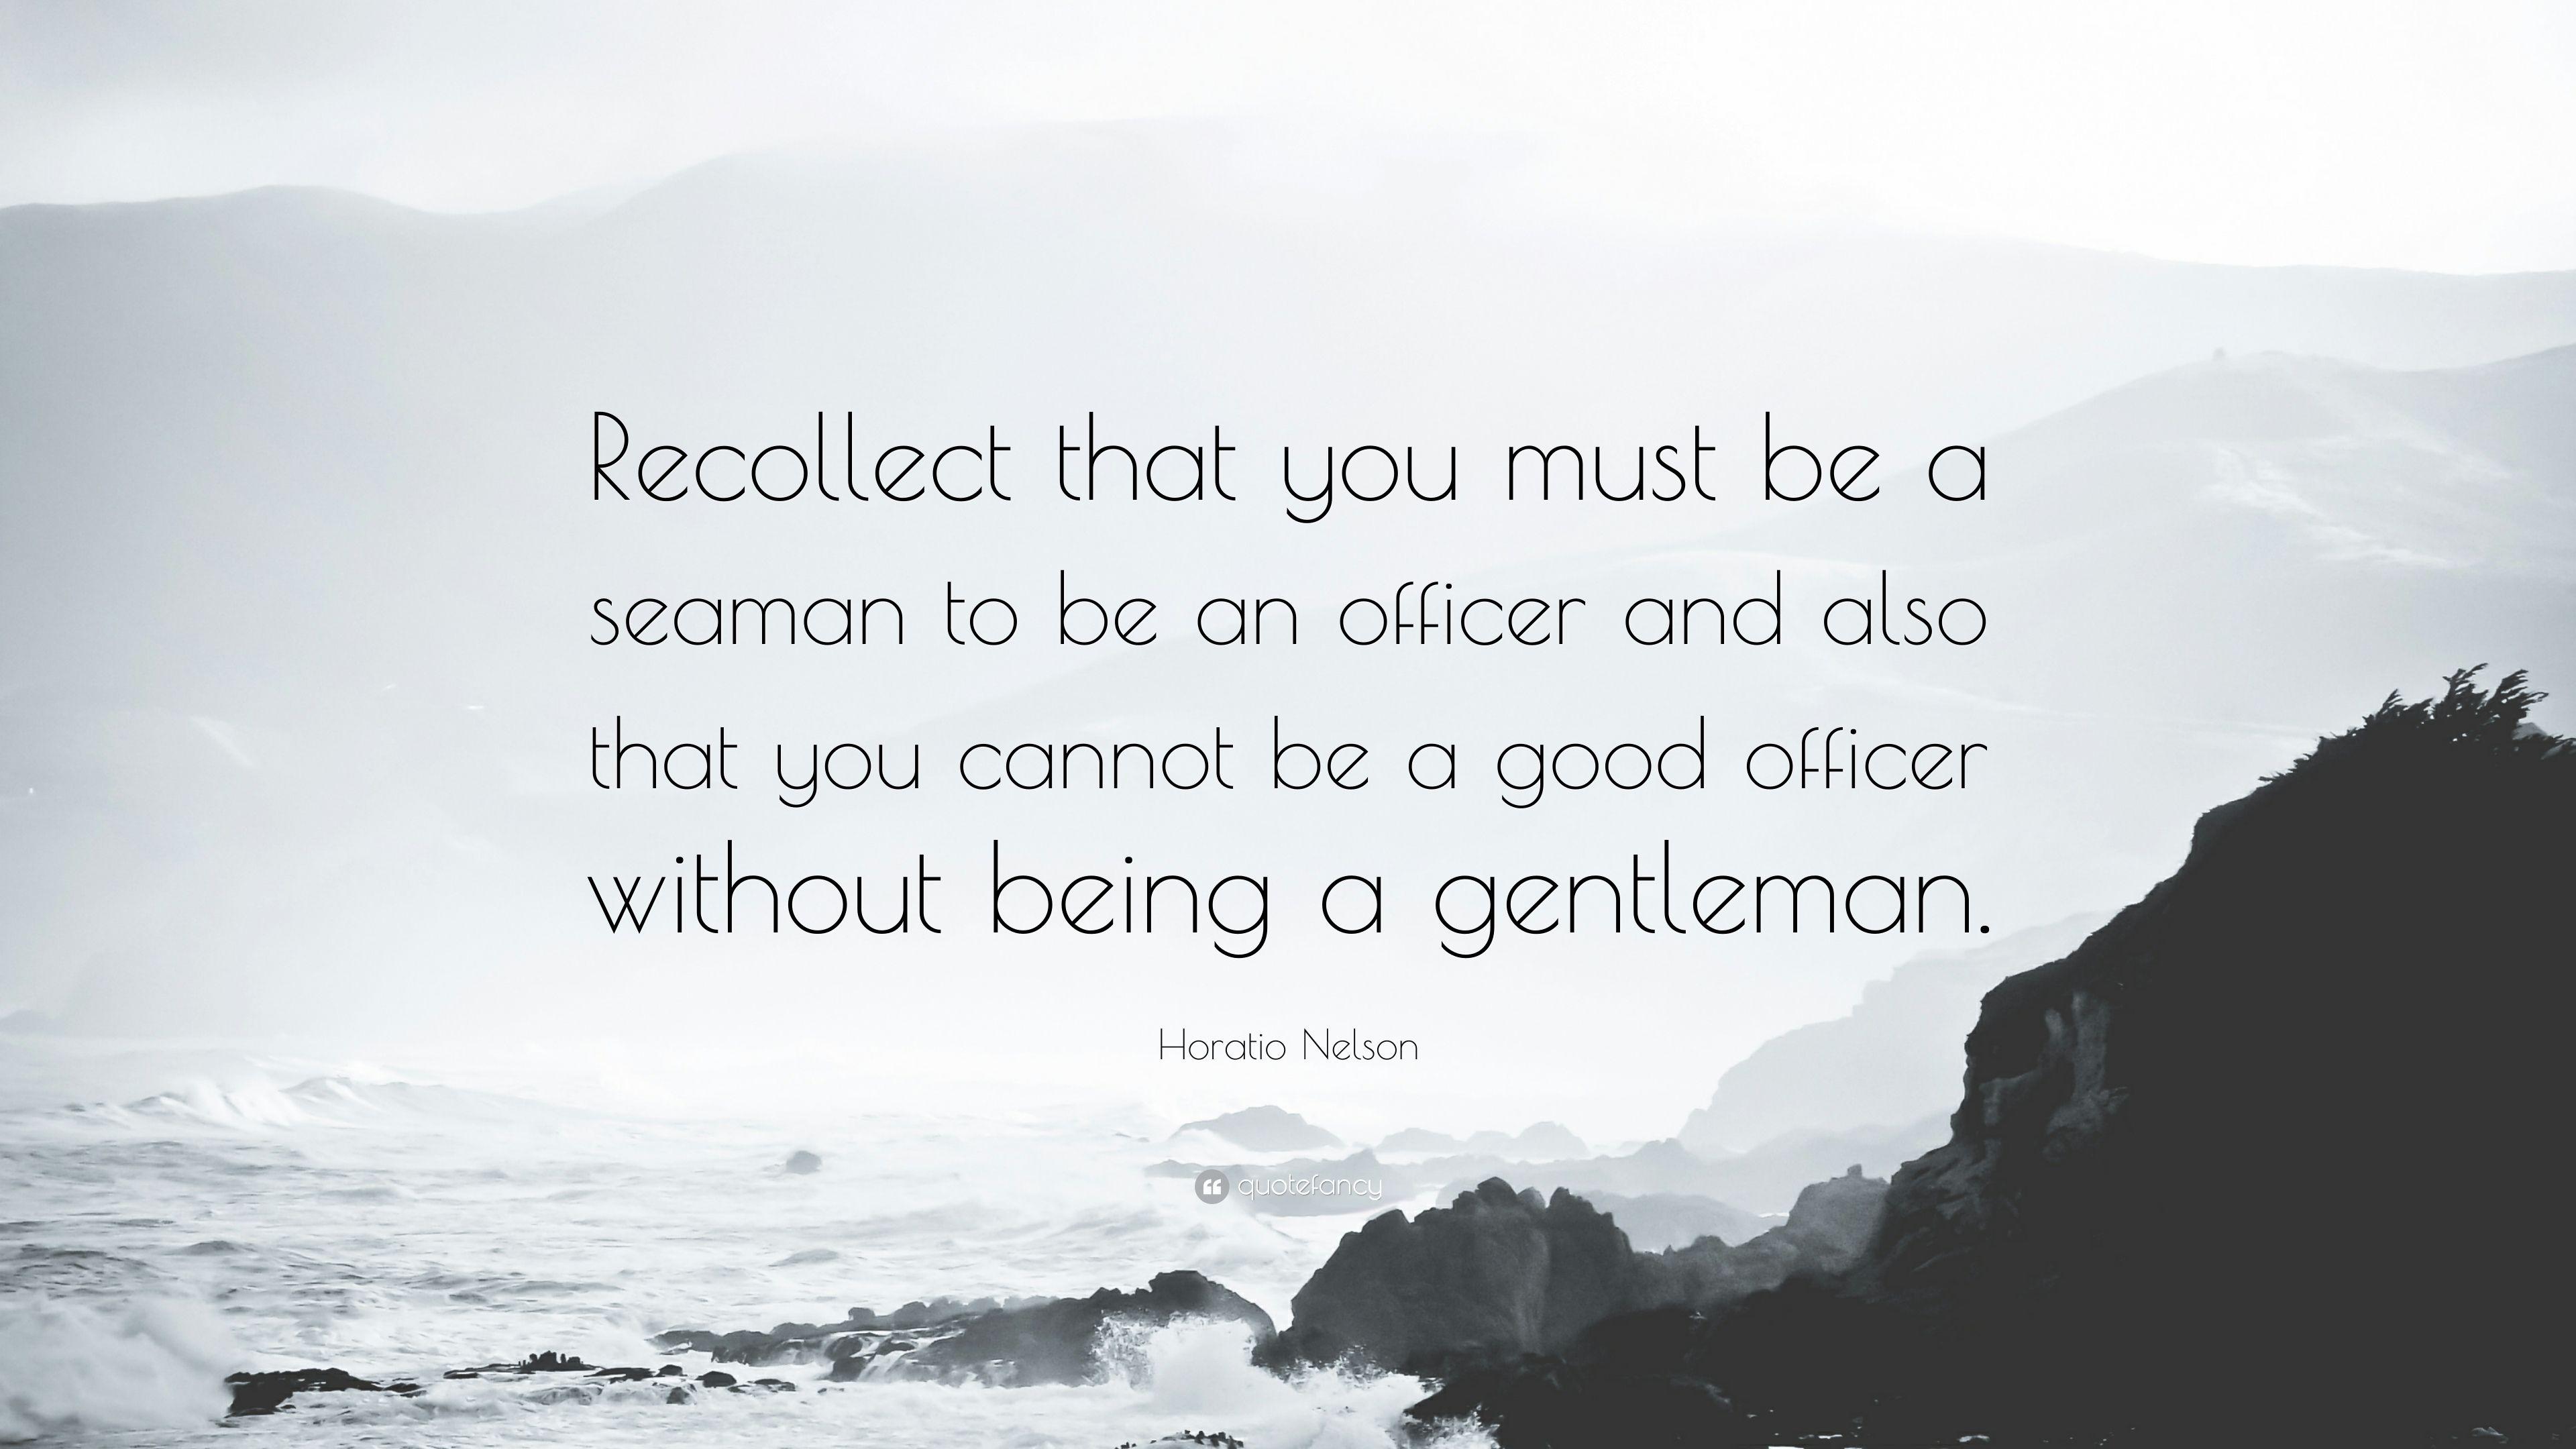 Horatio Nelson Quote: “Recollect that you must be a seaman to be